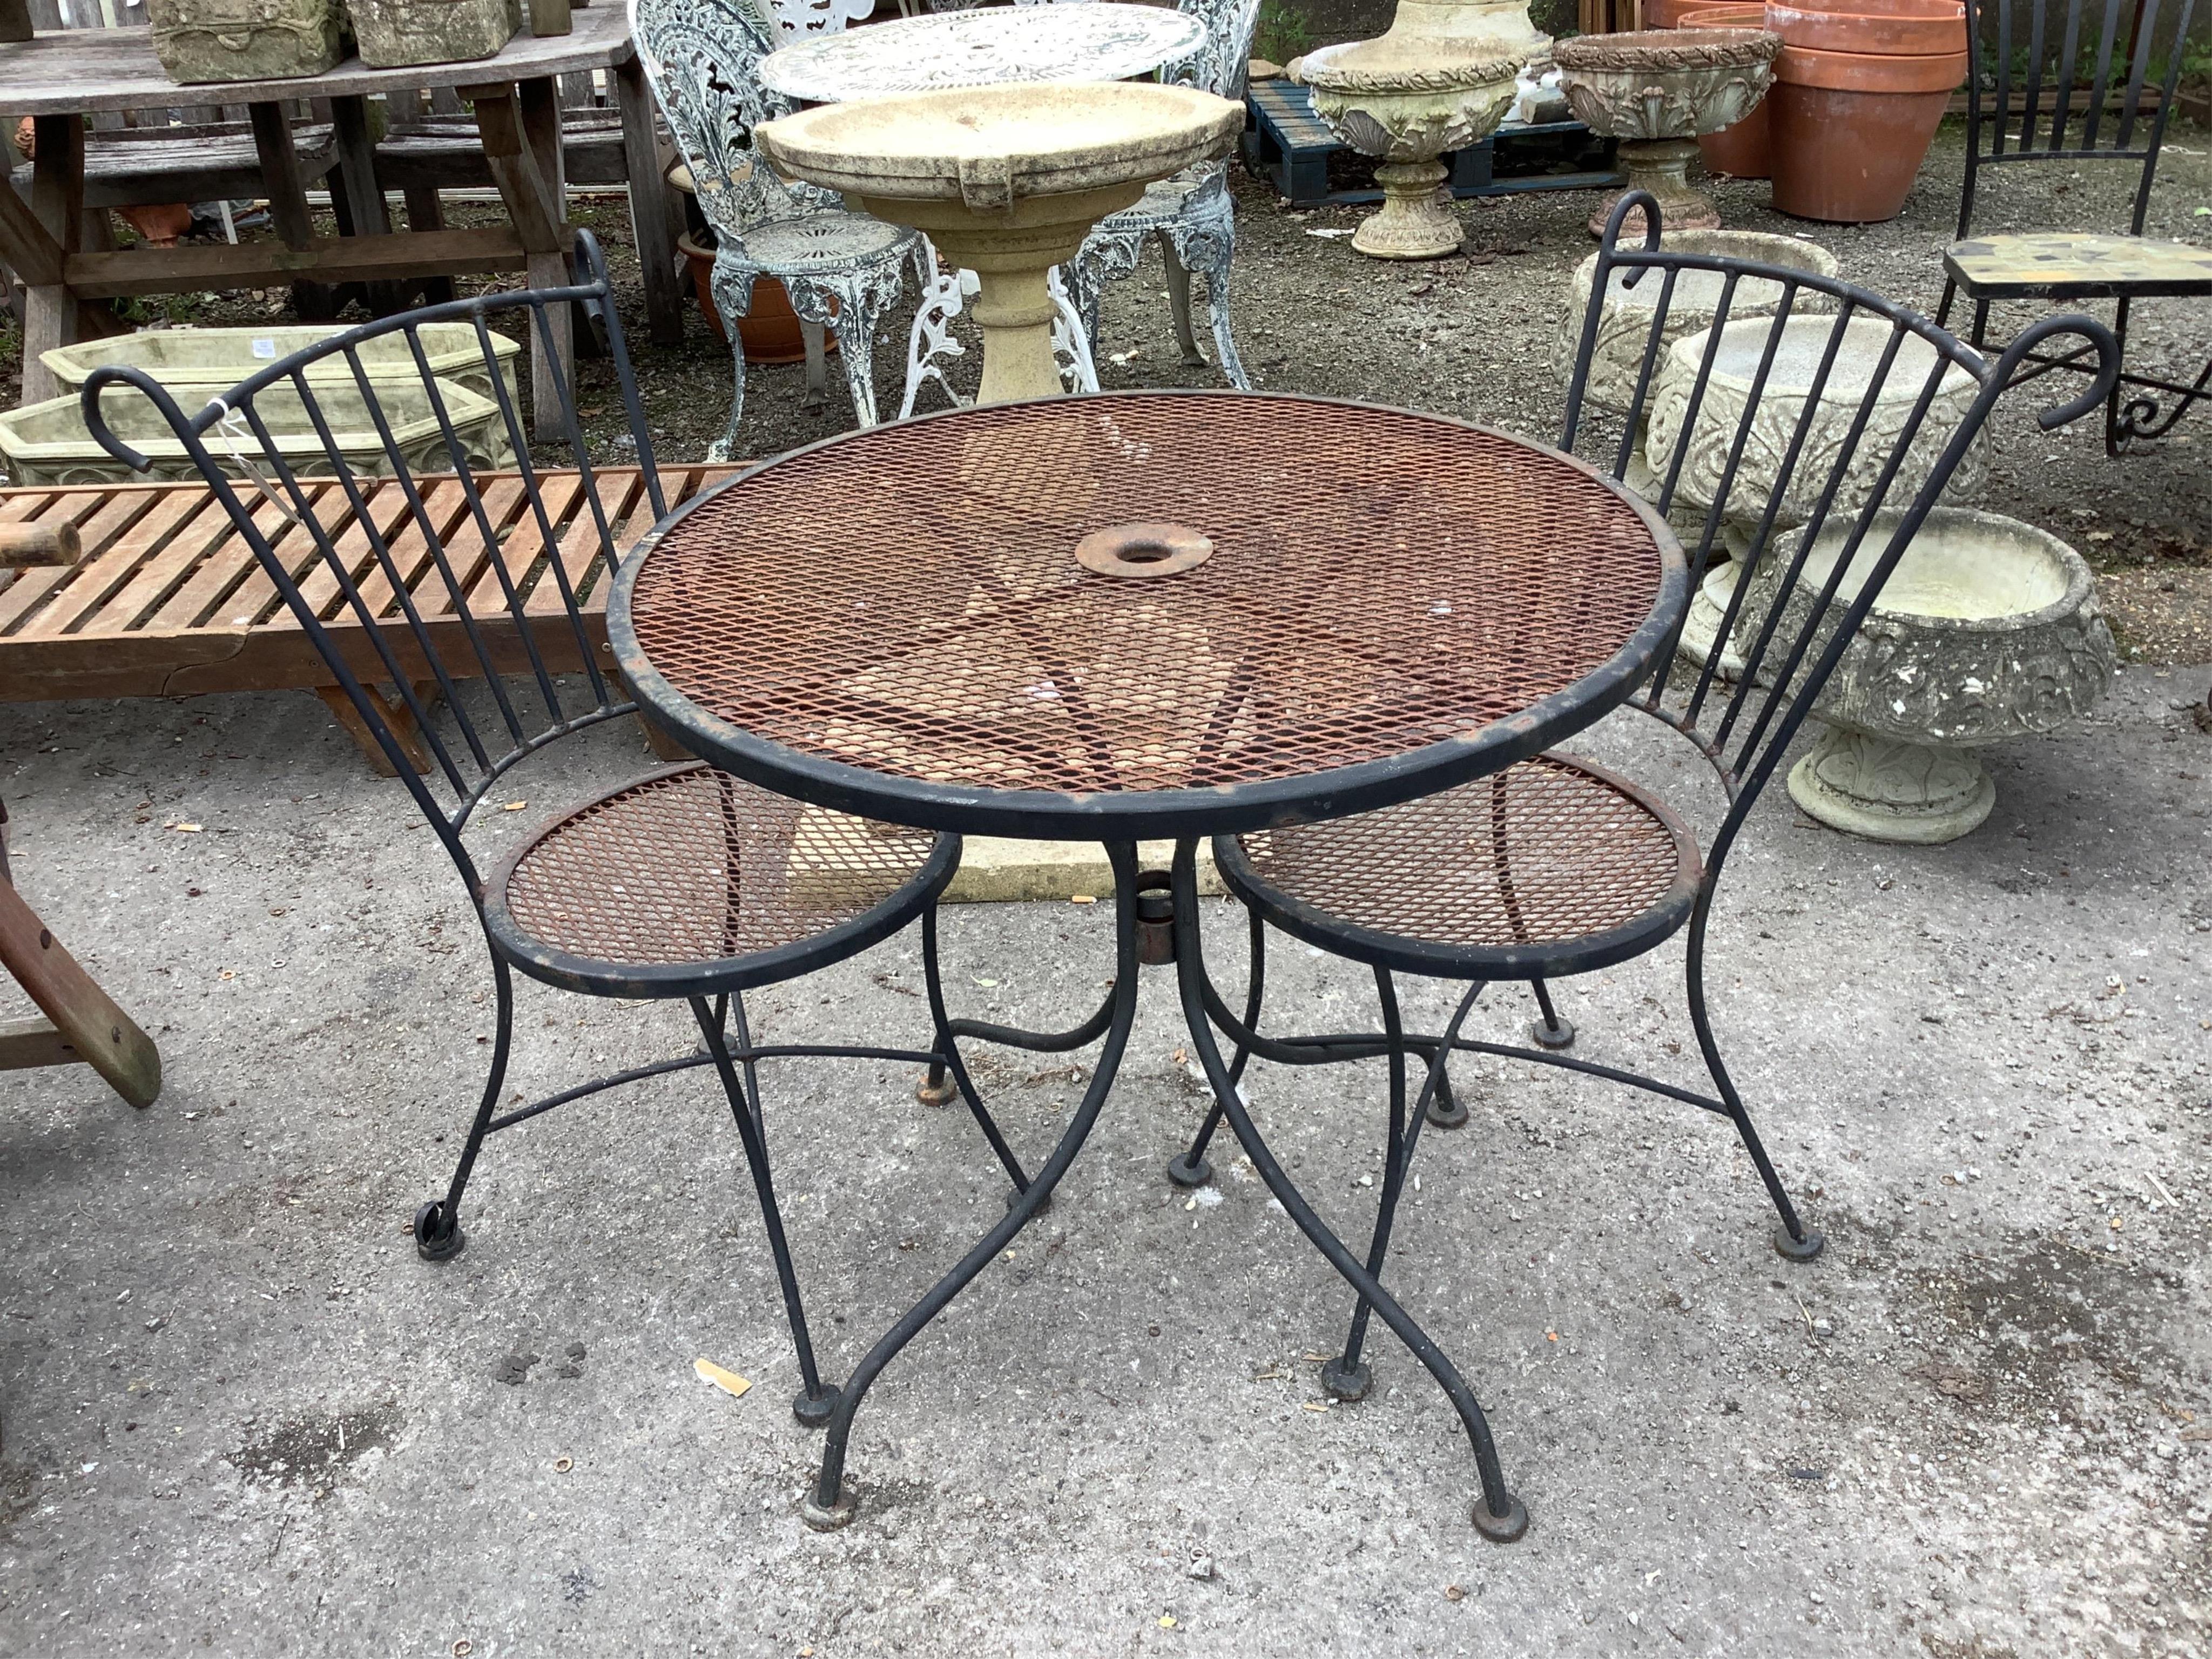 A wrought iron circular garden table, diameter 78cm, height 71cm together with a pair of matching chairs